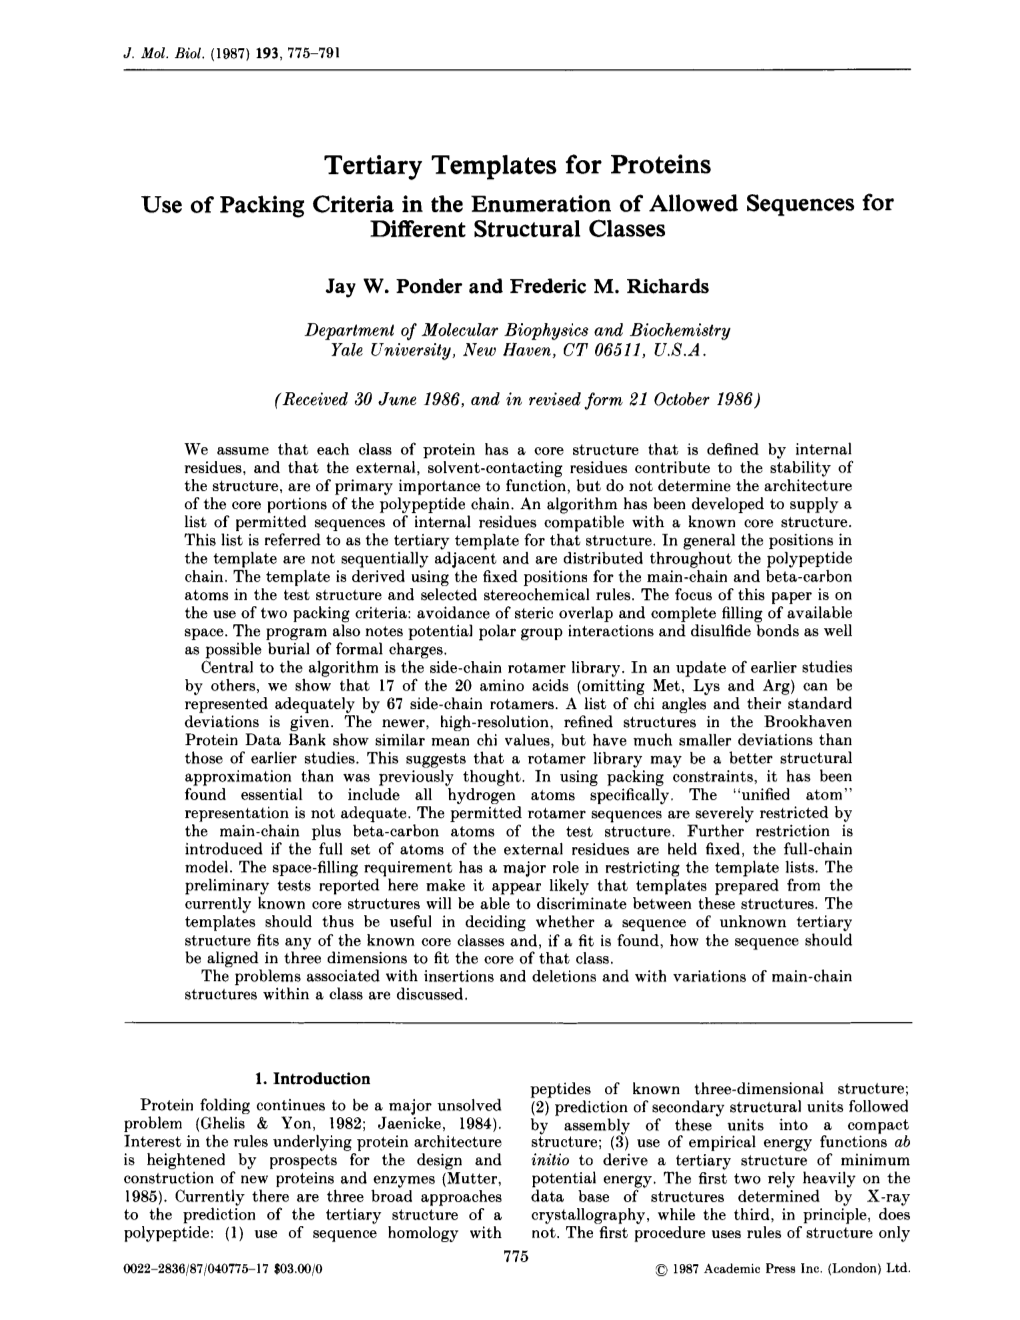 Tertiary Templates for Proteins Use of Packing Criteria in the Enumeration of Allowed Sequences for Different Structural Classes